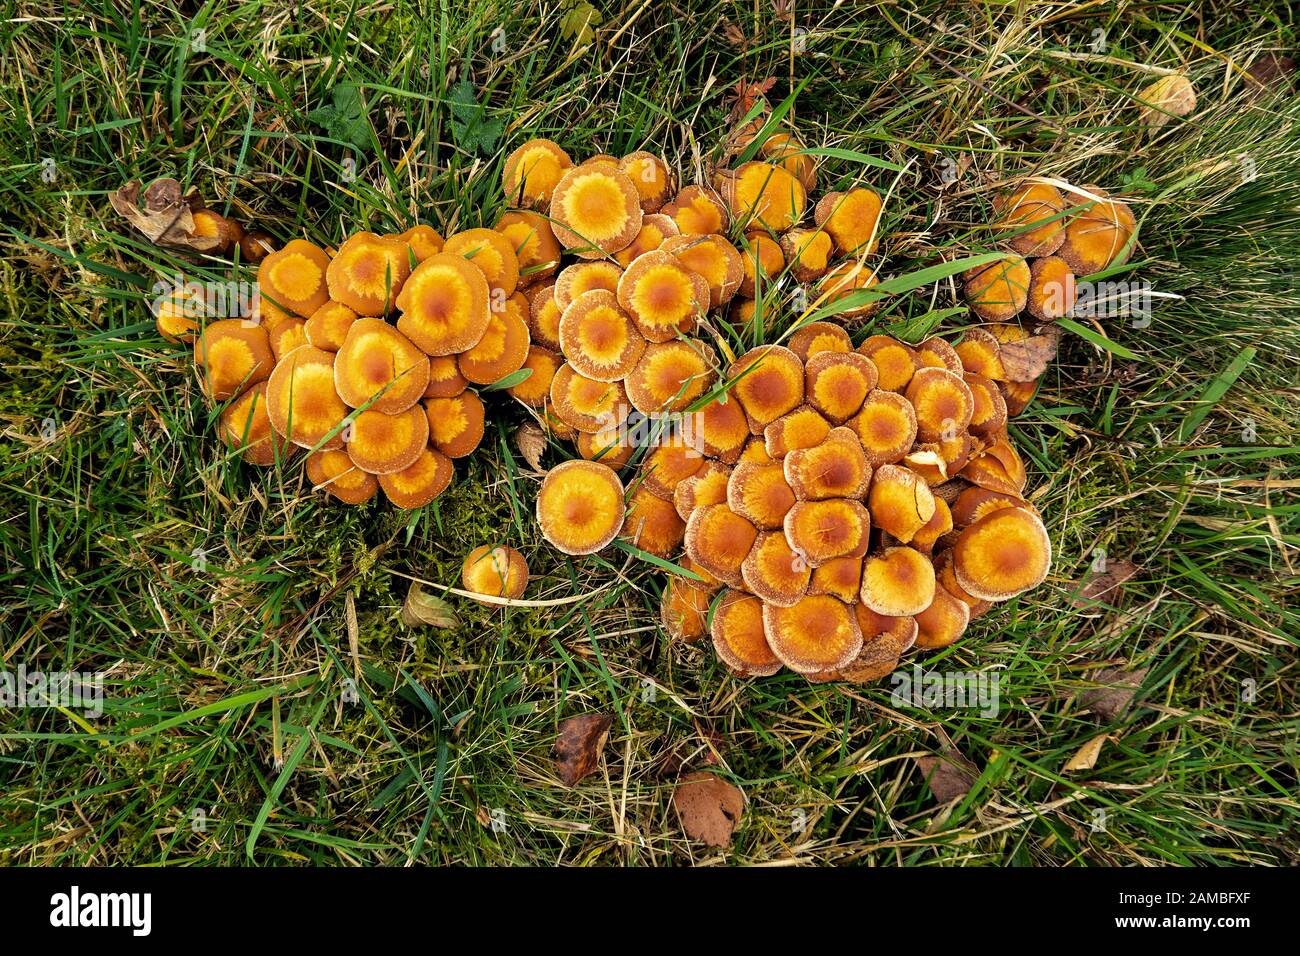 many small brown mushrooms growing in the lawn Stock Photo